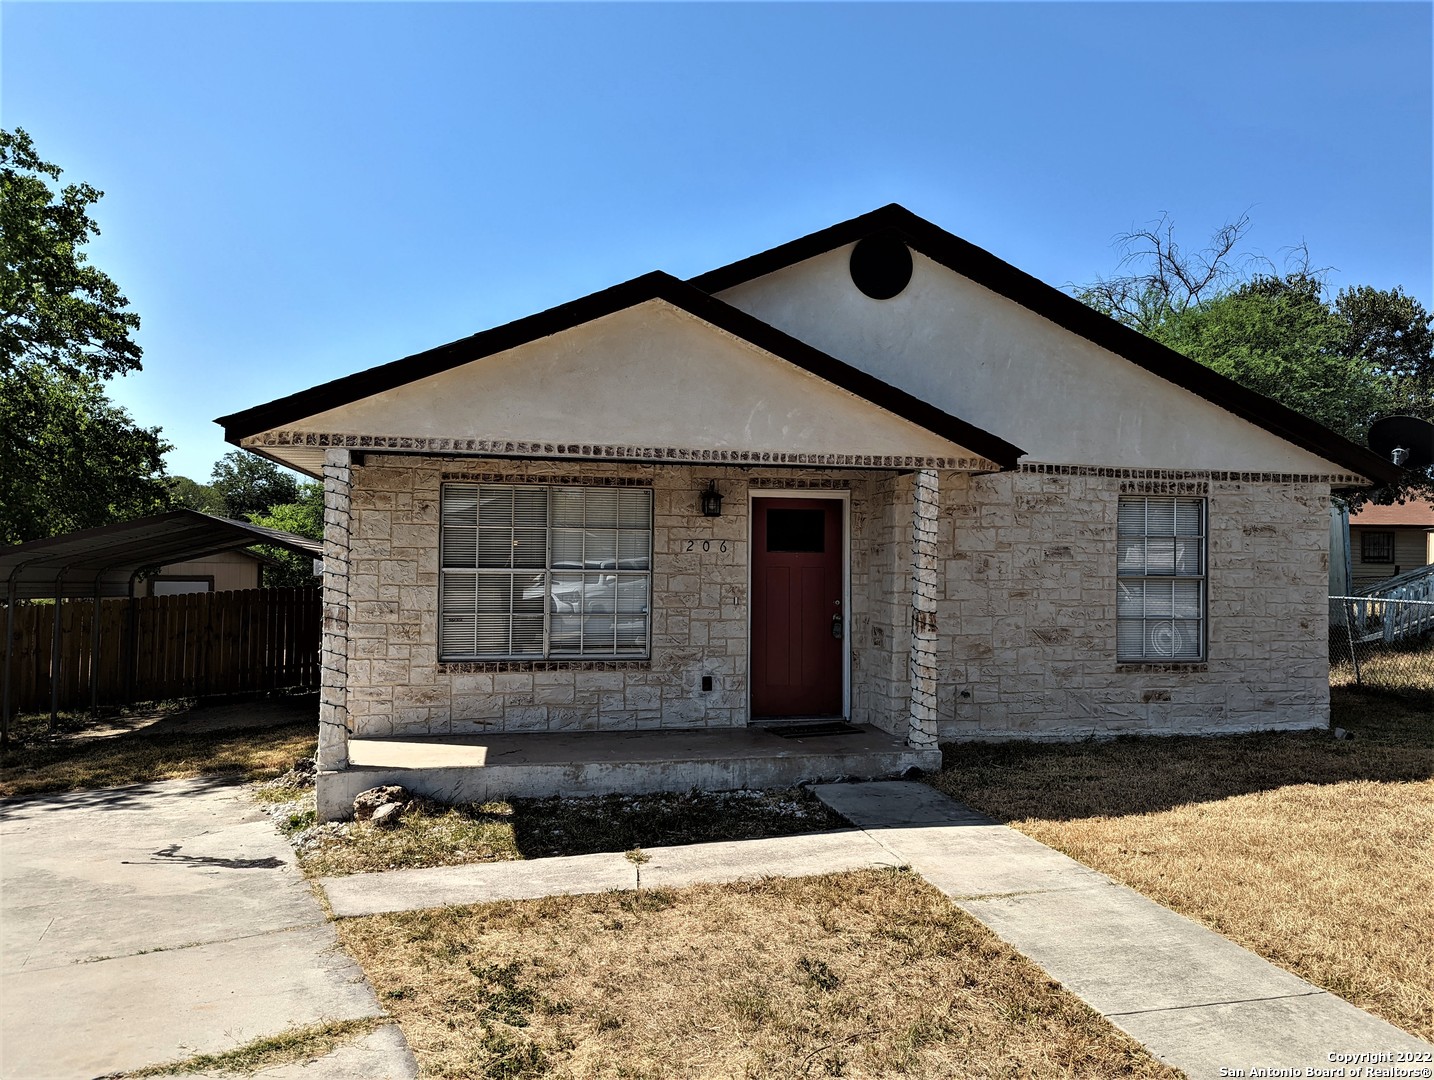 3 bedroom/2 bathroom home in the sought-after neighborhood of Denver Heights. Recent renovations include granite countertops, new cabinets, and tile flooring. Beautiful stone exterior faces a quiet Cul De Sac.